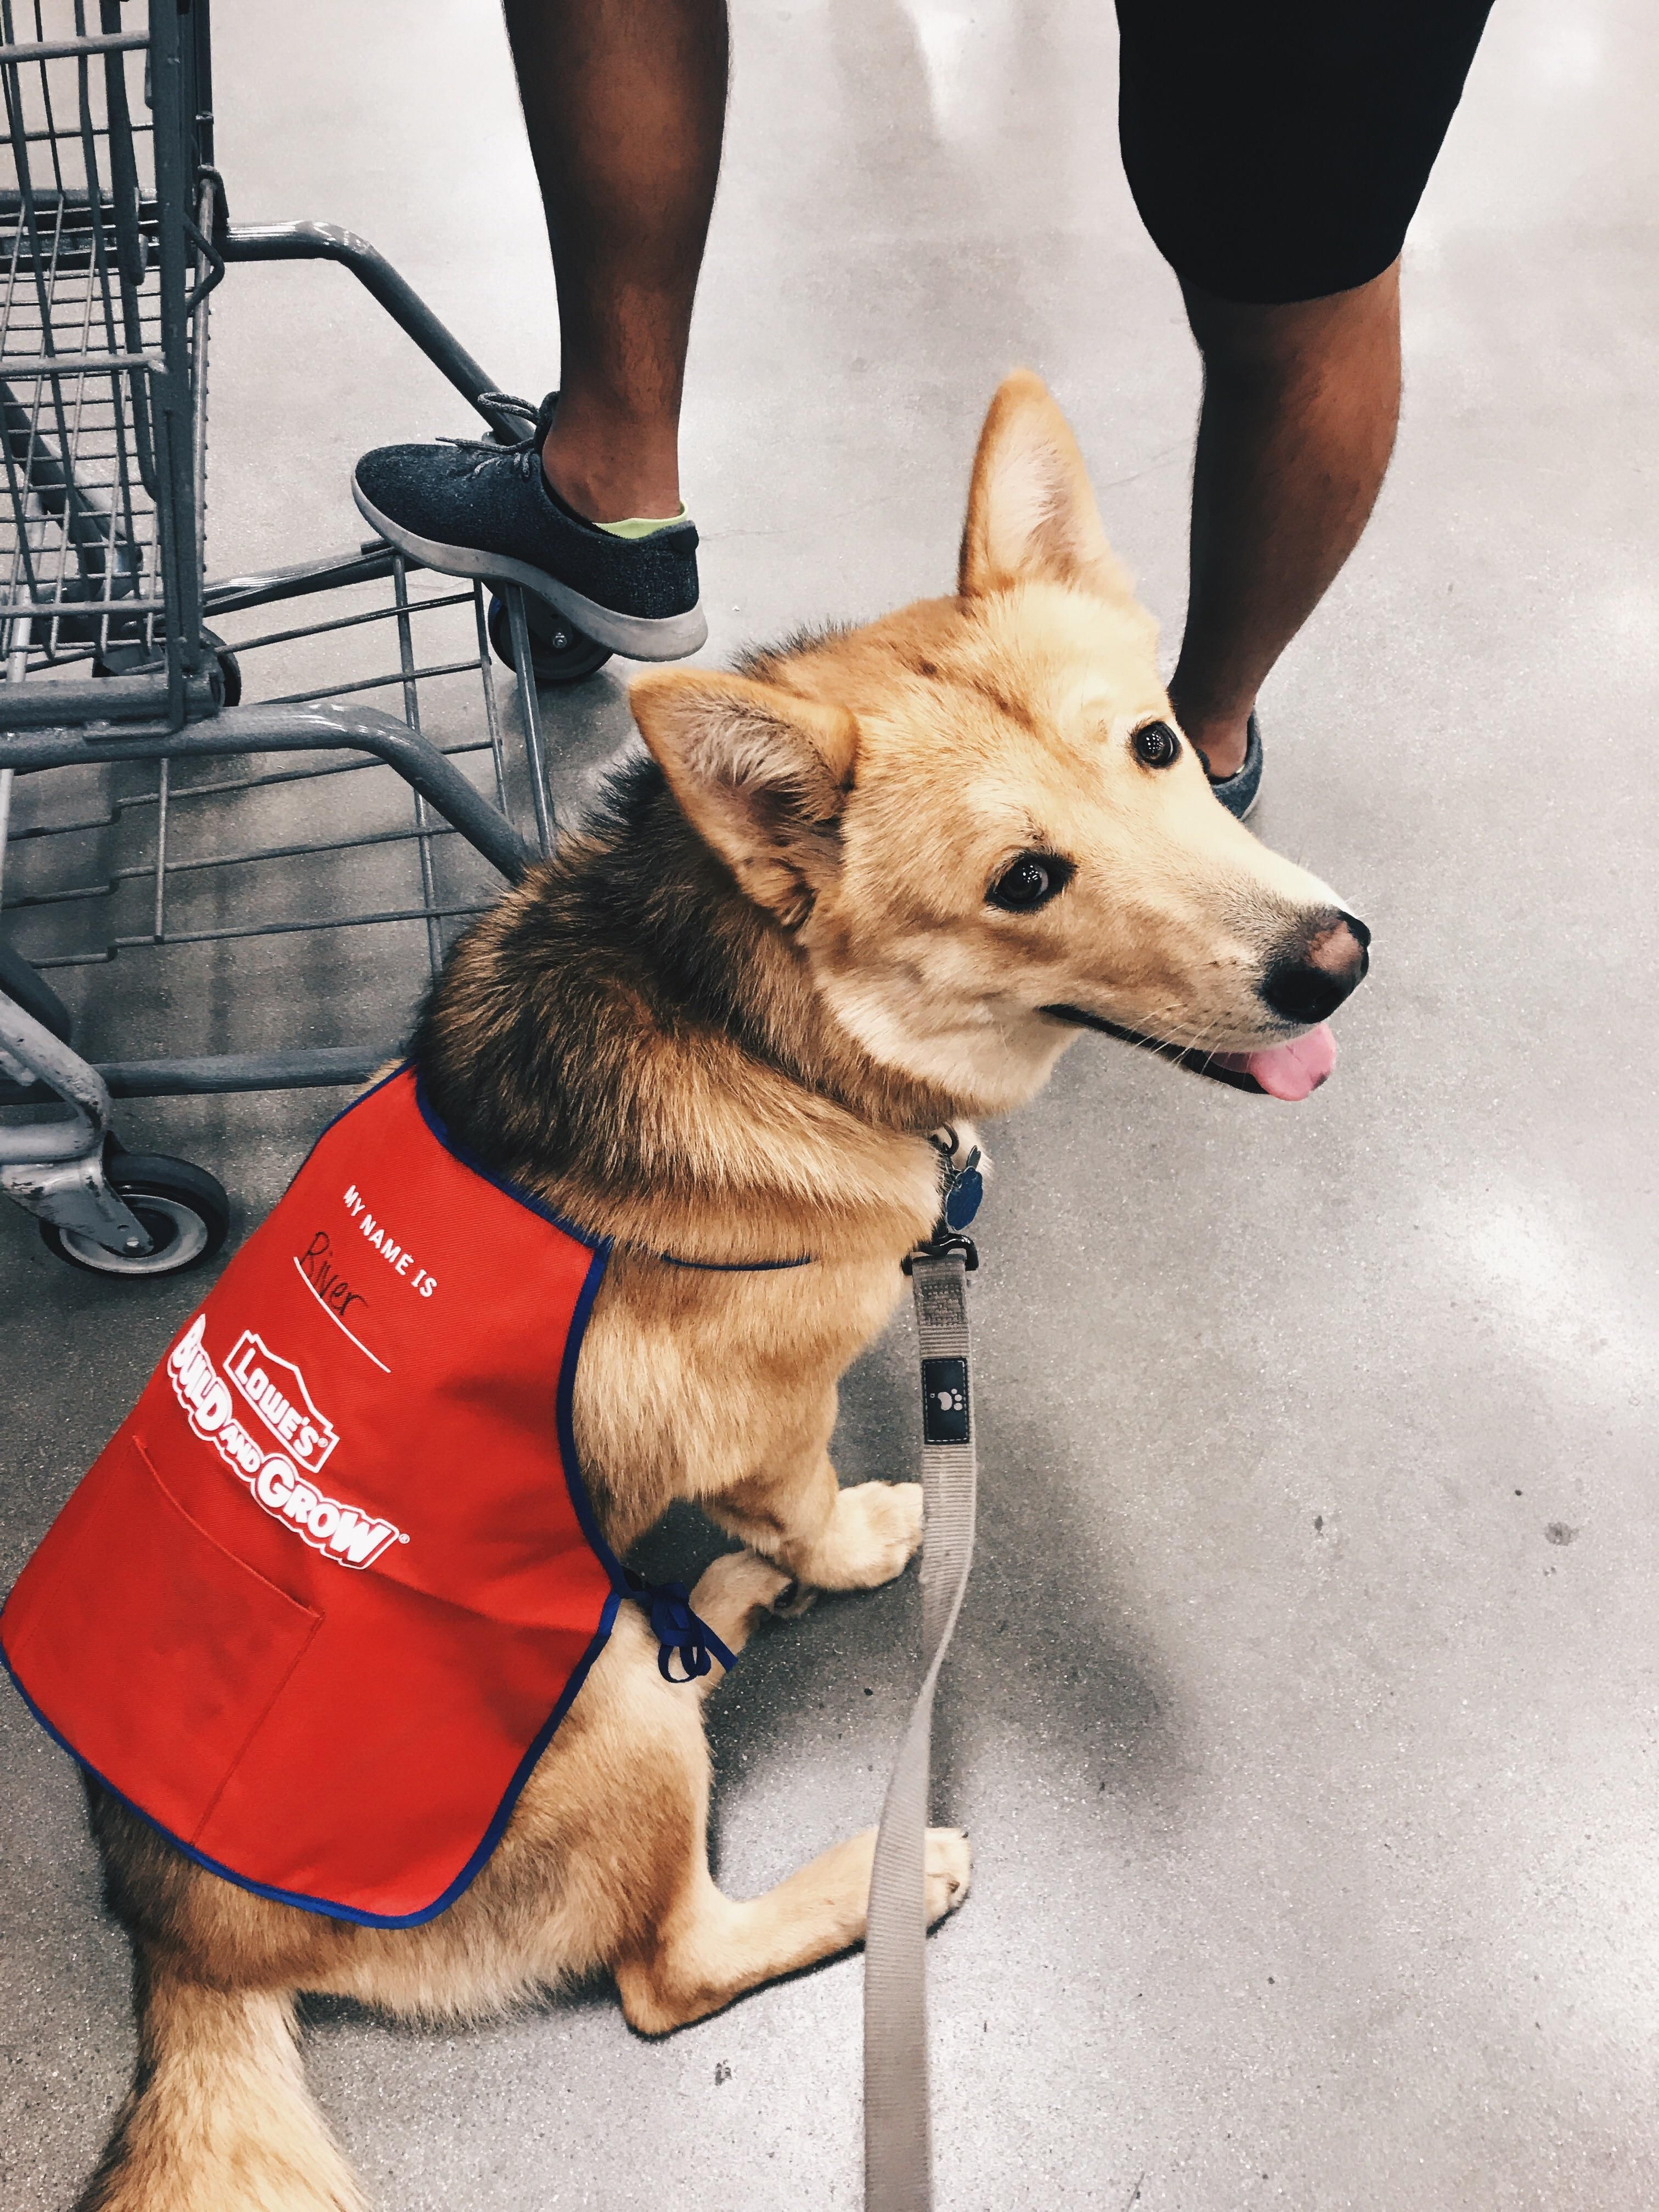 My dog "worked" at Lowes with me for a day